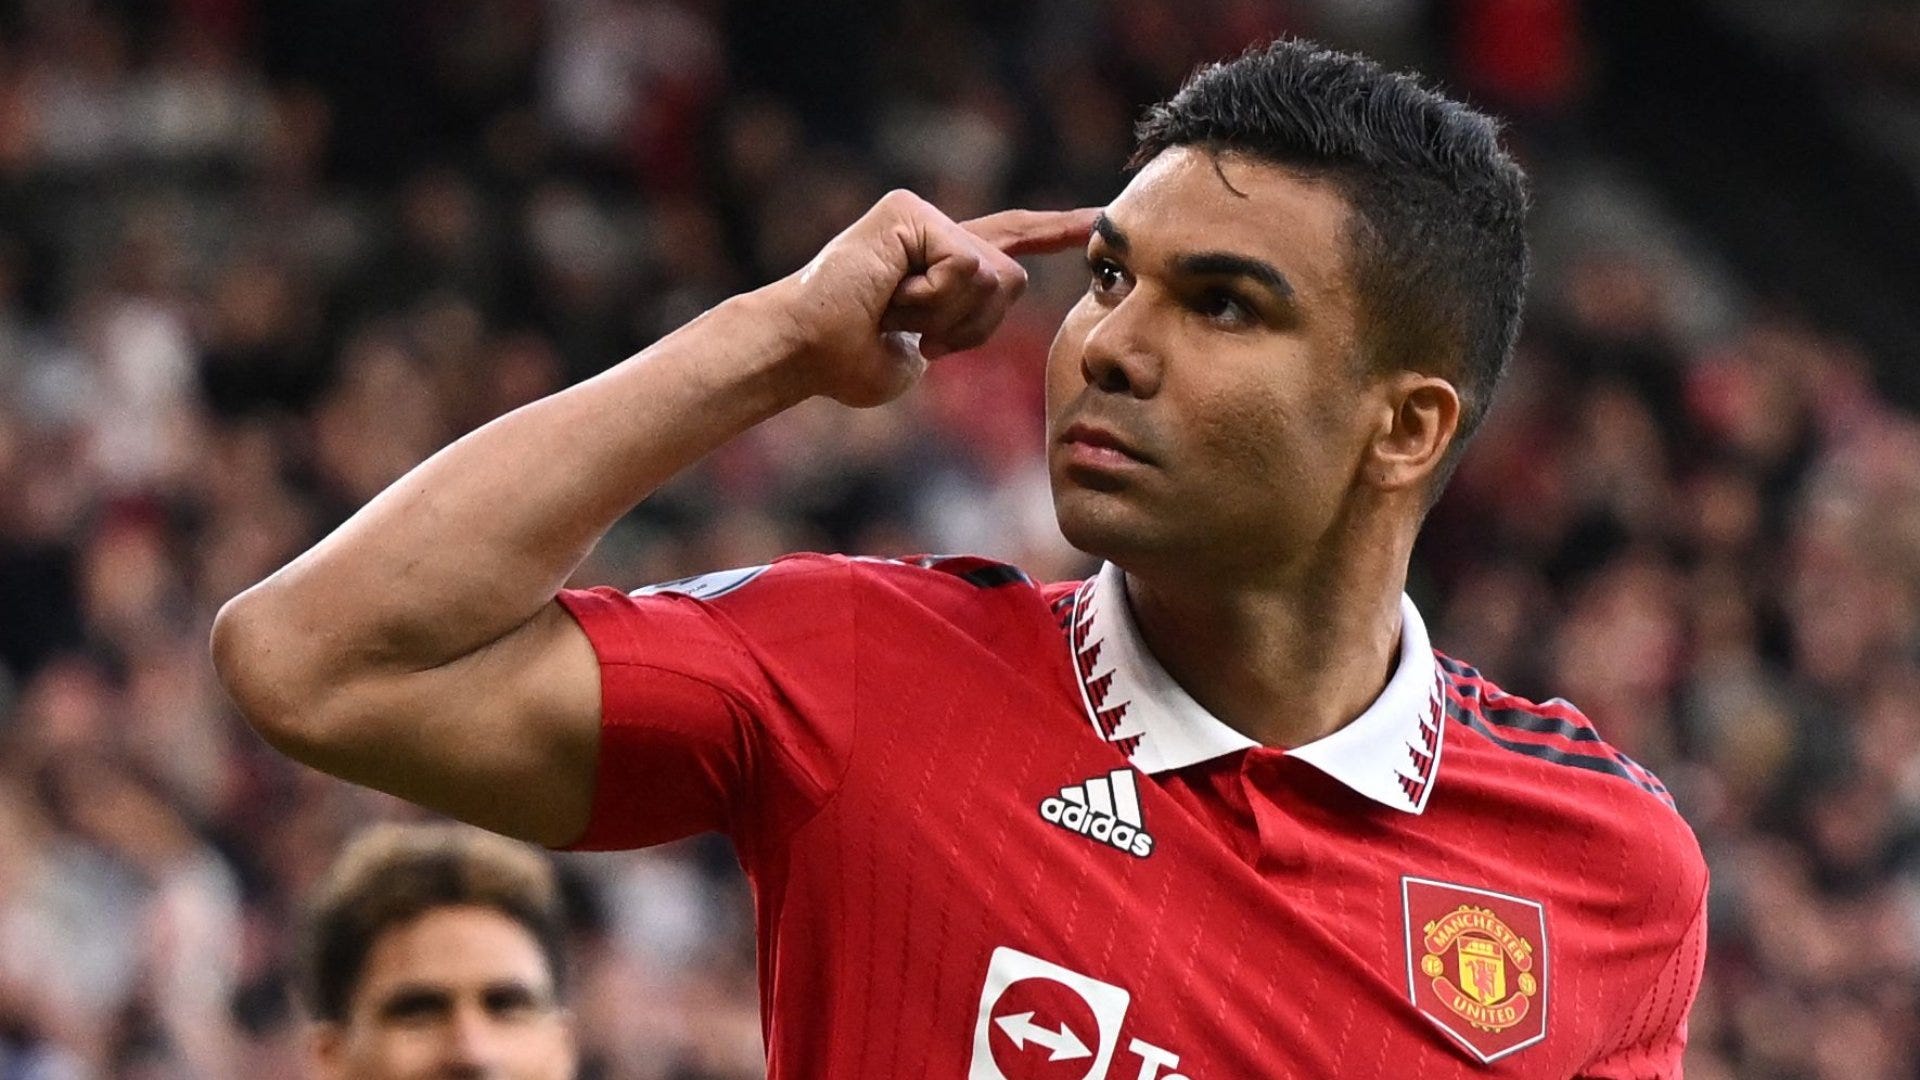 casemiro-confirms-he-texted-agent-vowing-to-fix-man-utd-after-brentford-humiliation-but-refuses-to-take-credit-for-improvement-under-erik-ten-hag-or-goal-com-india